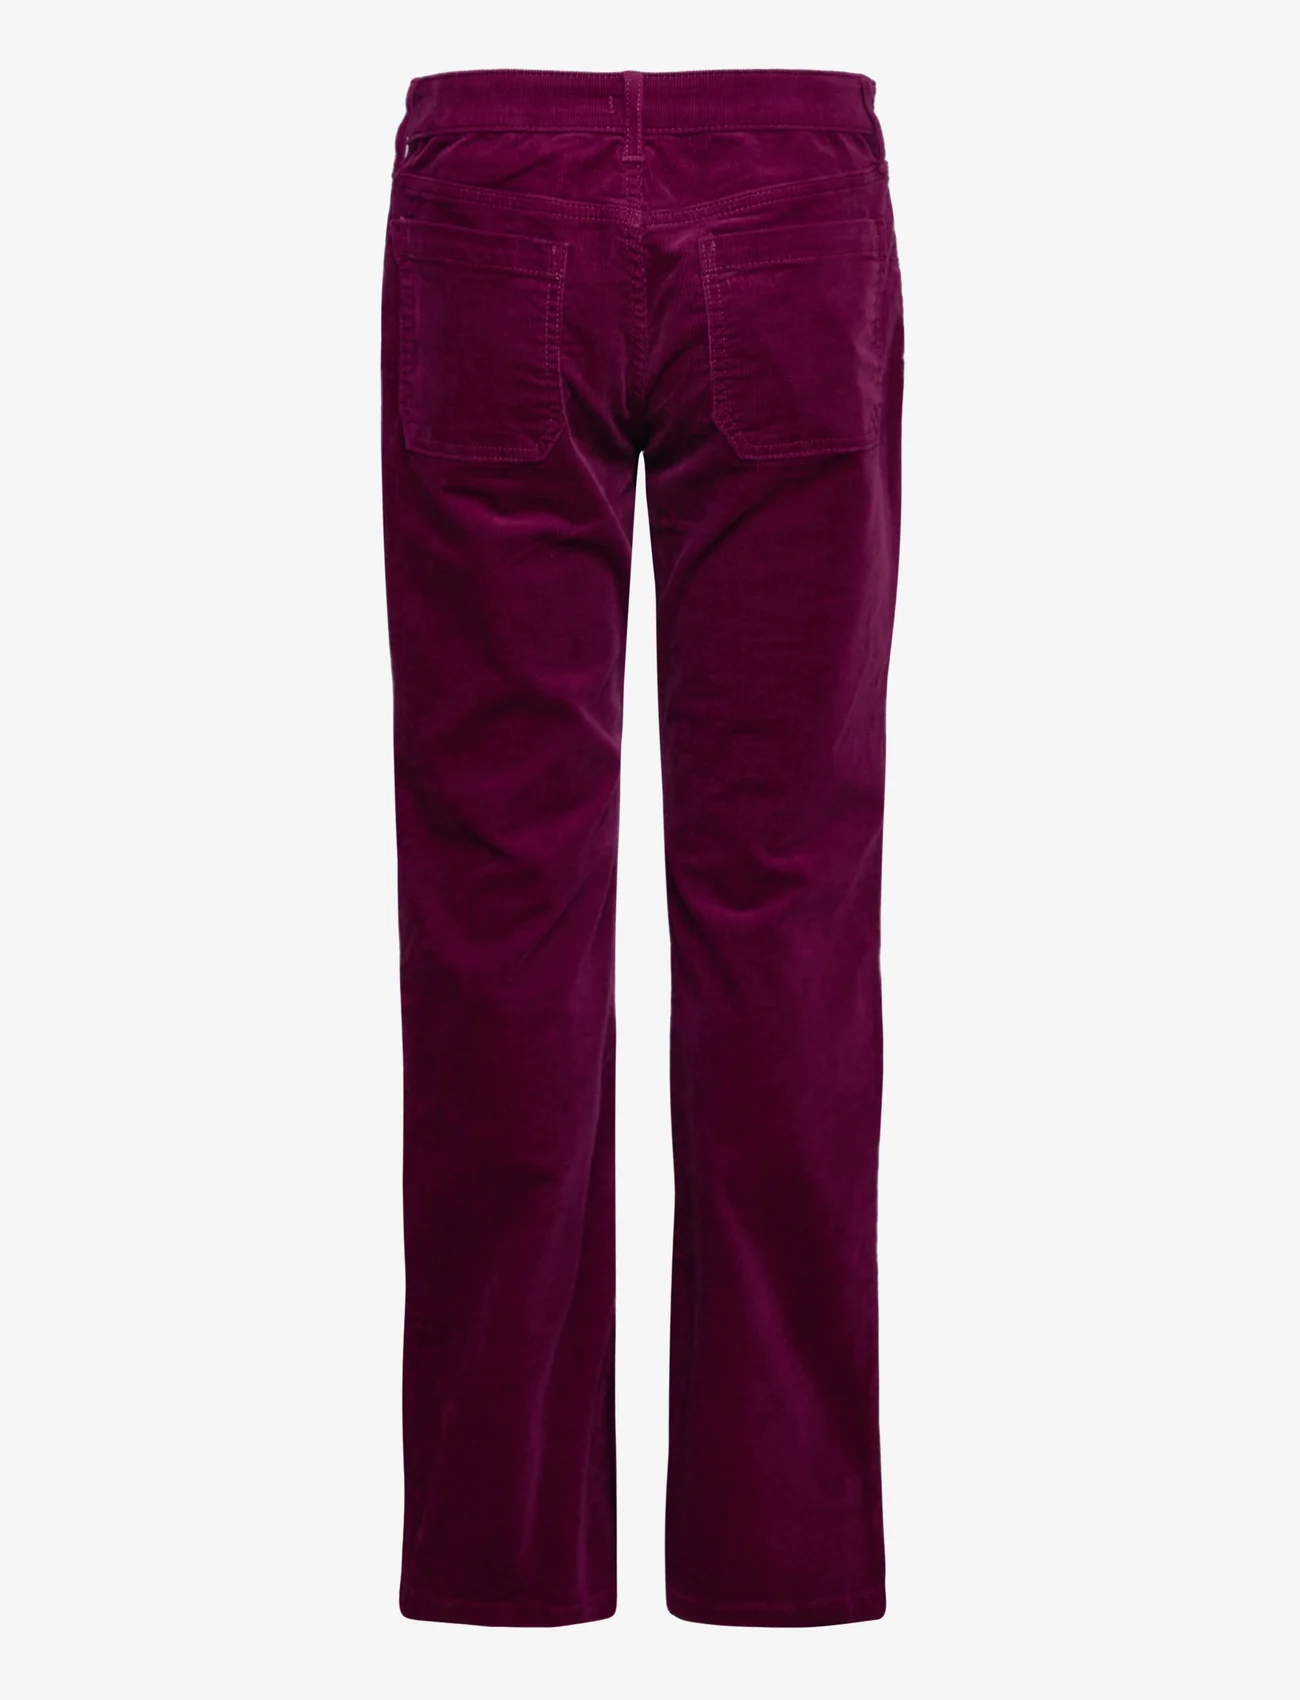 GAP - Kids High Rise Corduroy Flare Jeans with Washwell - bootcut jeans - huckleberry - 1